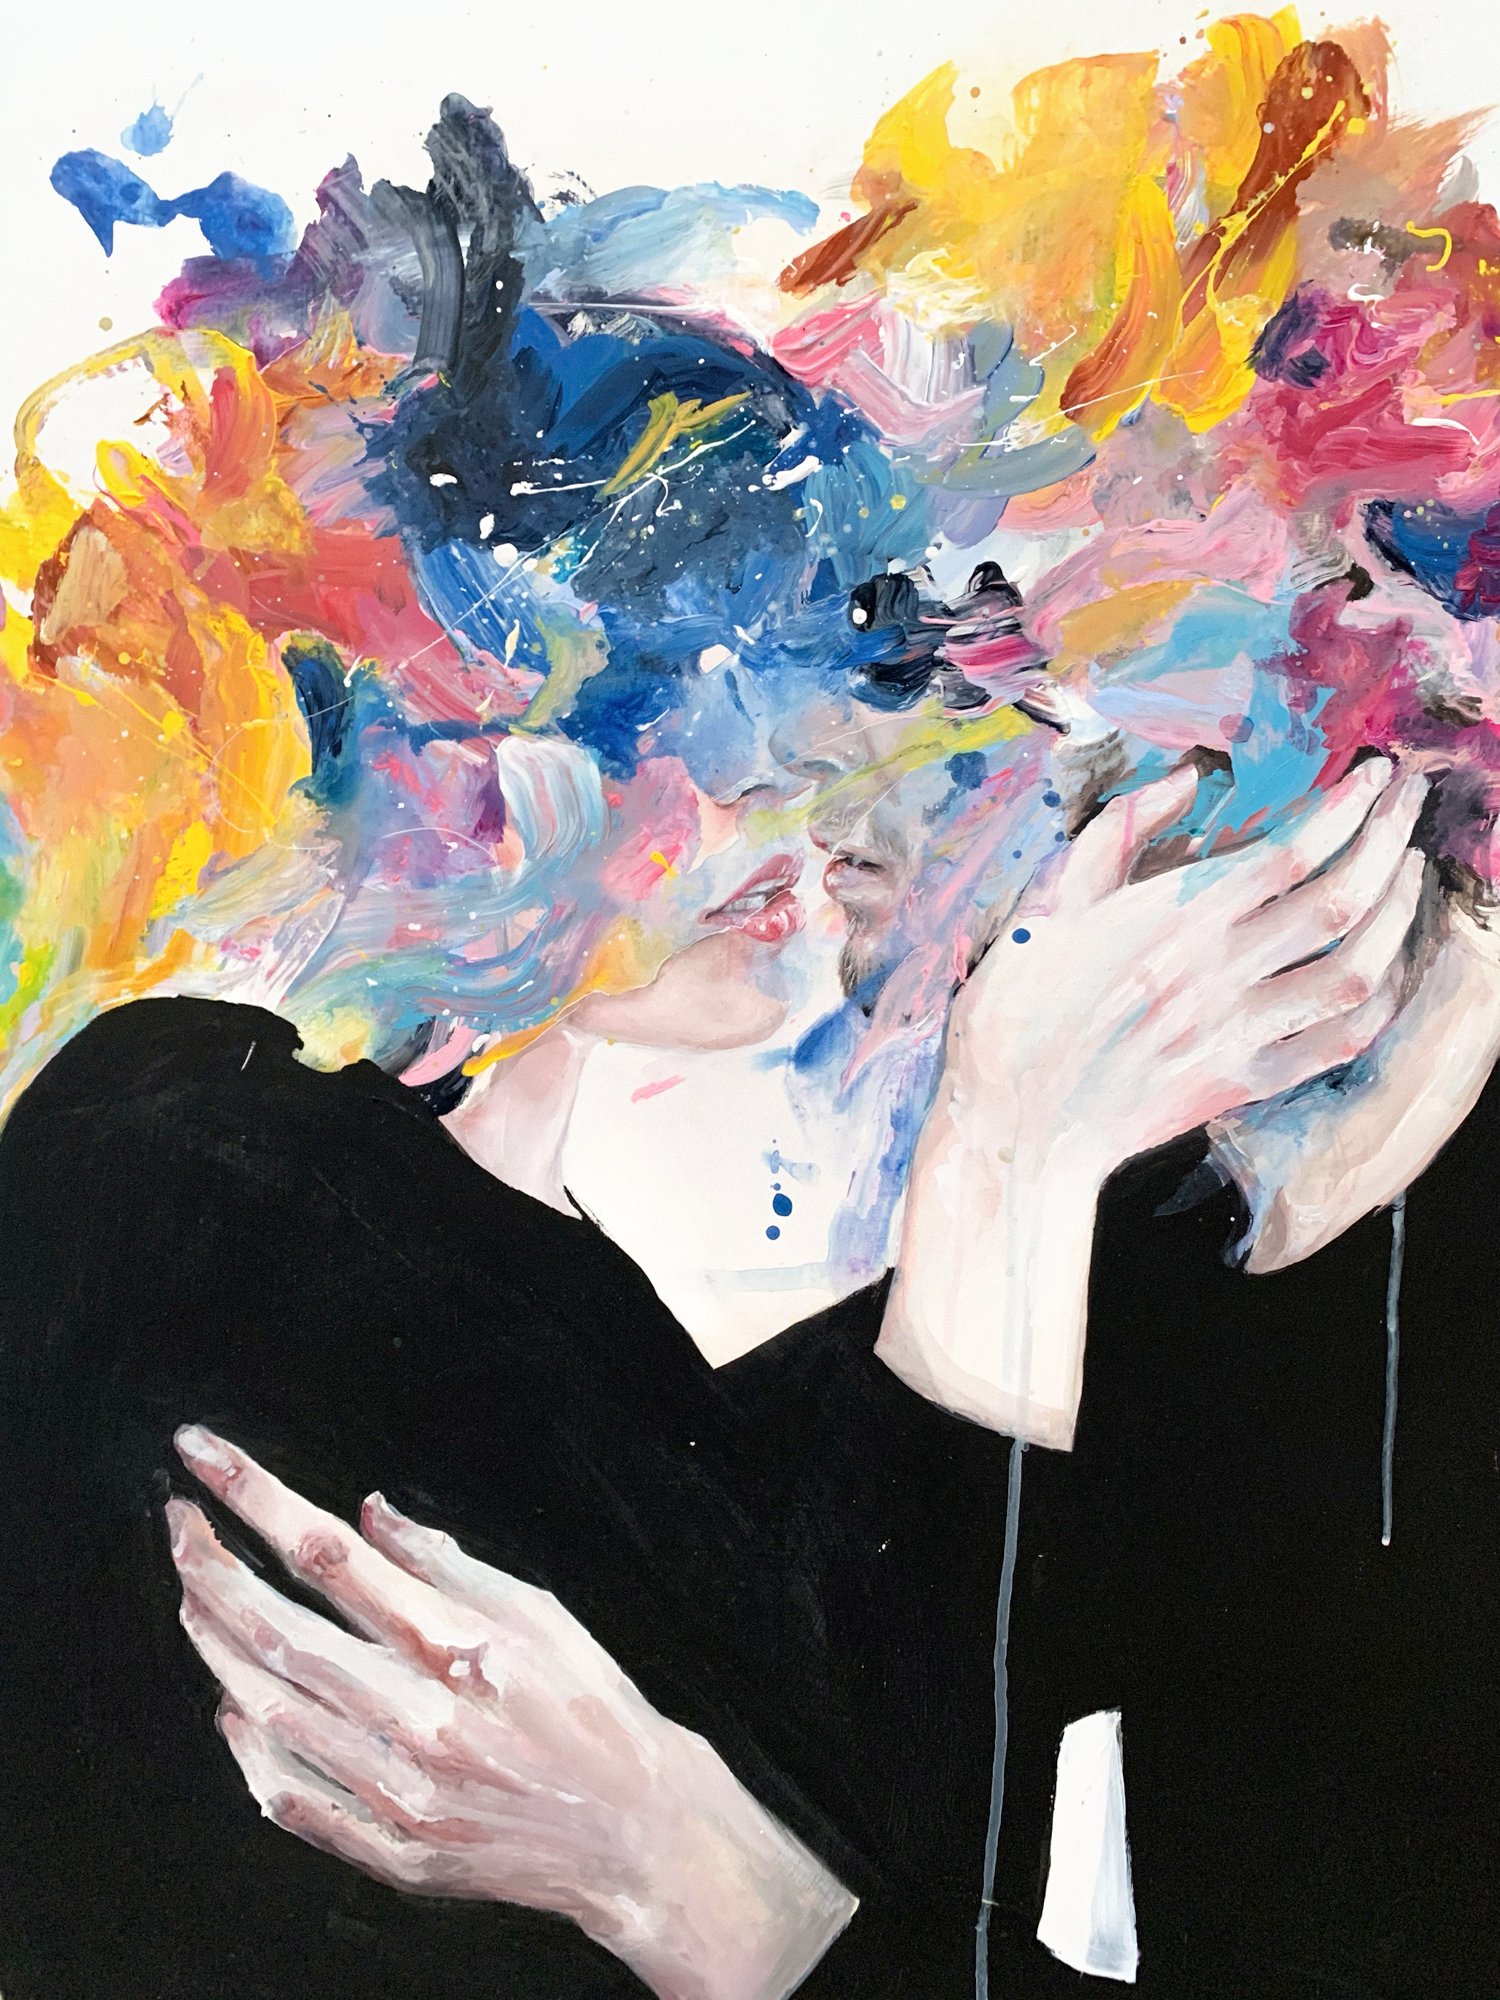 Agnes-Cecile intimacy on display